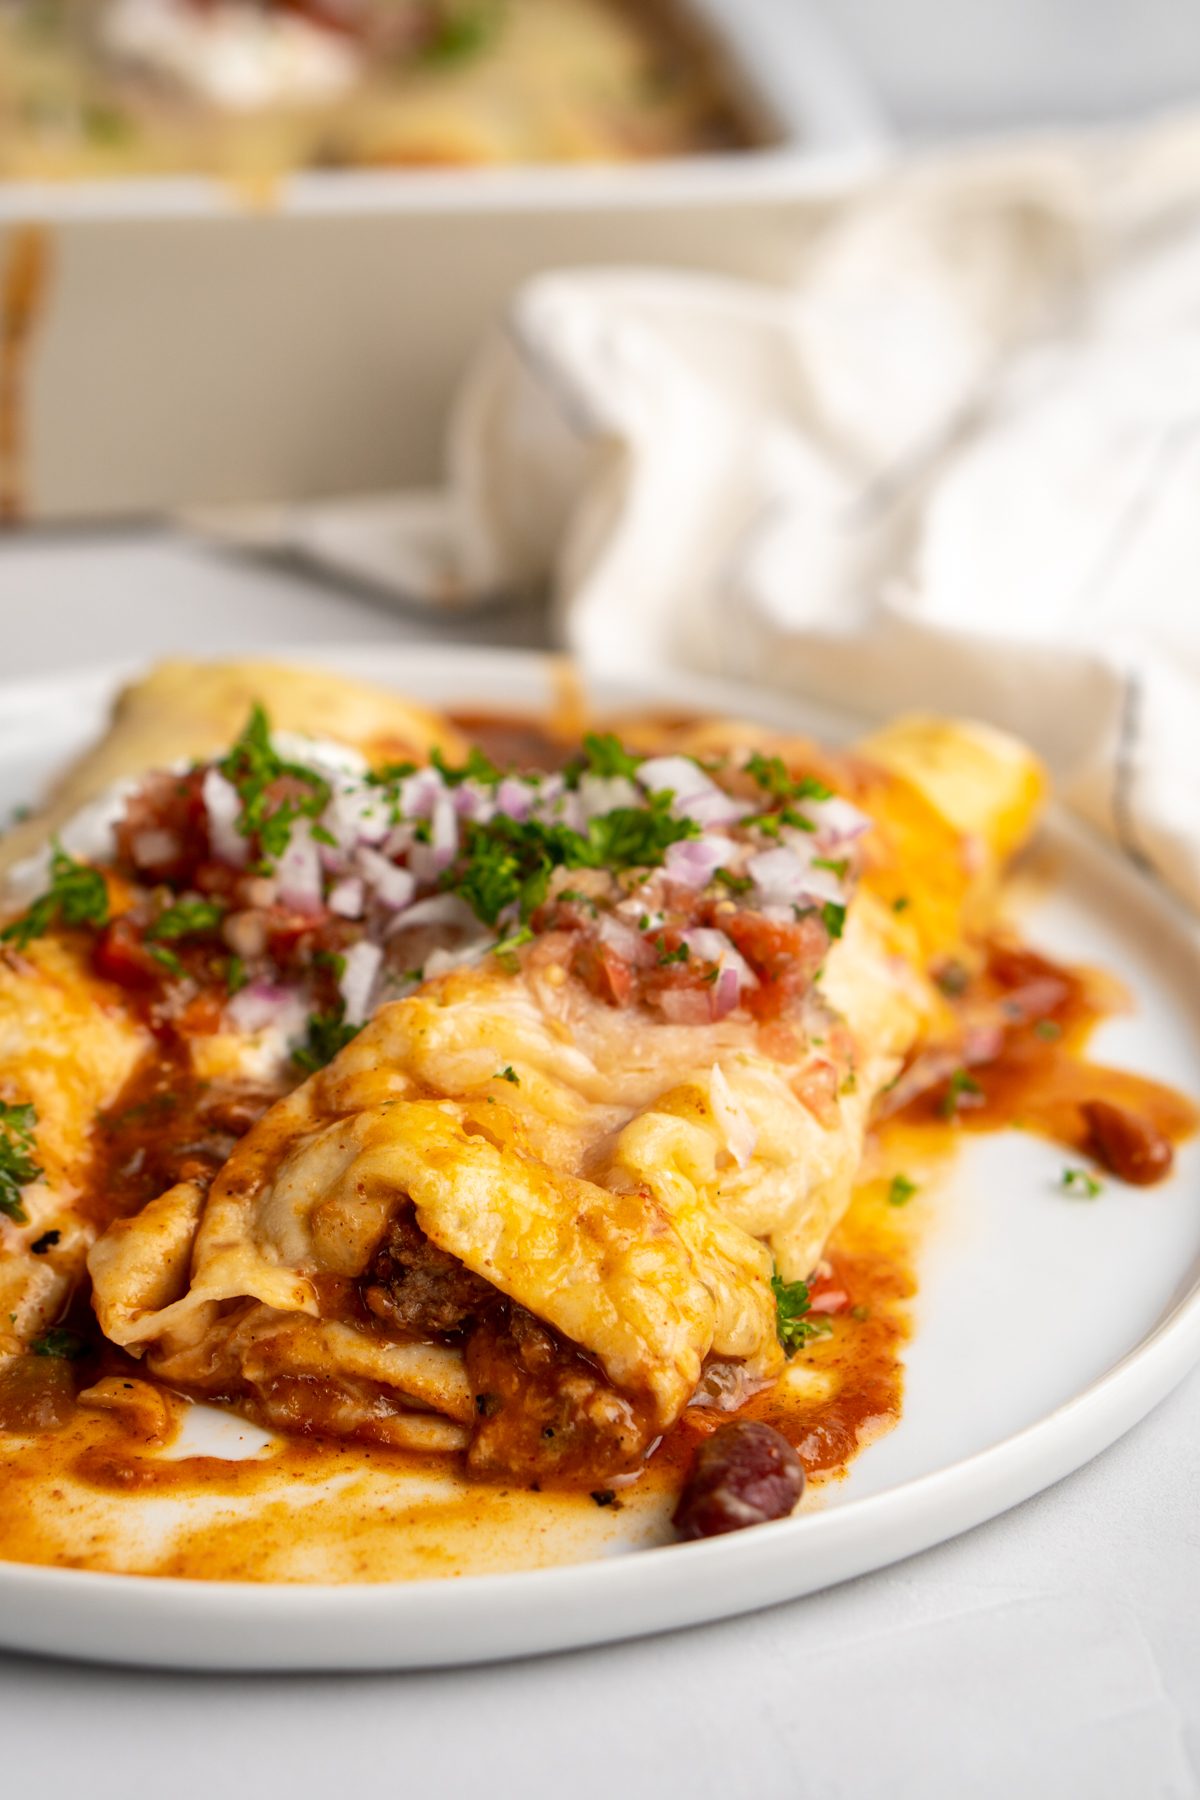 Chili Cheese Enchiladas on a plate.